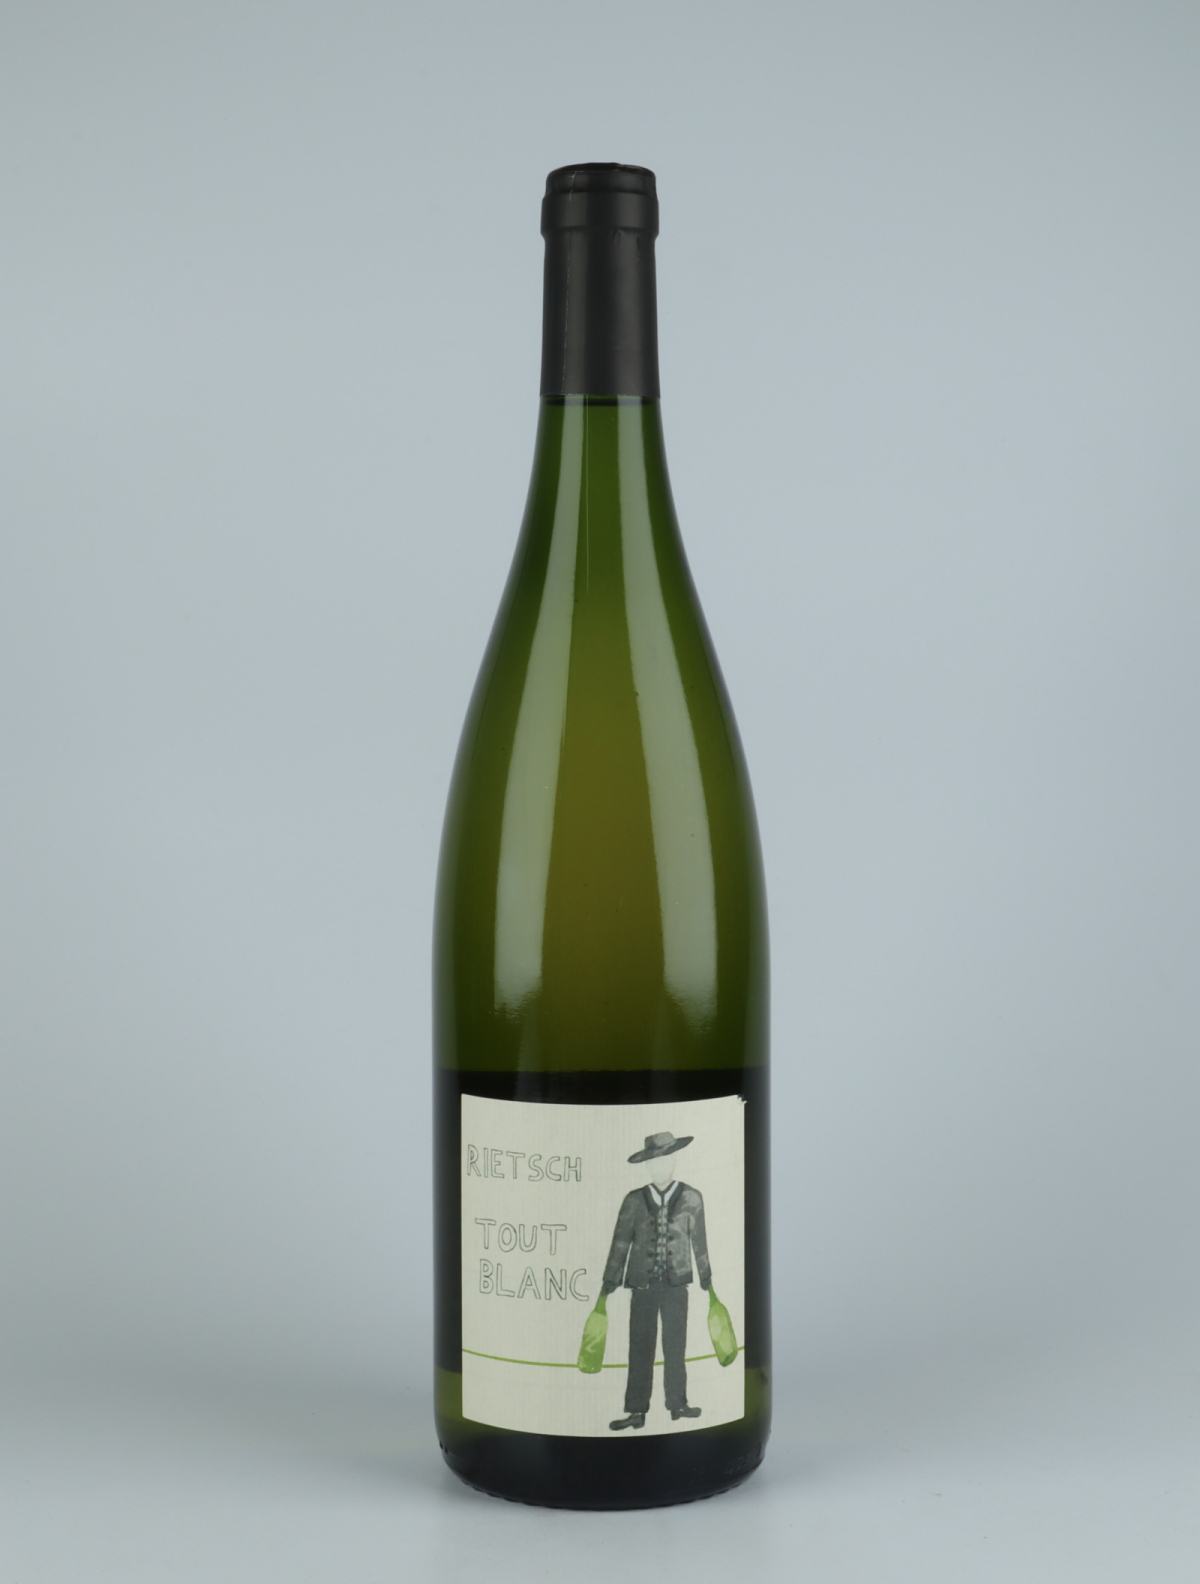 A bottle 2020 Blanc au Litre White wine from Domaine Rietsch, Alsace in France